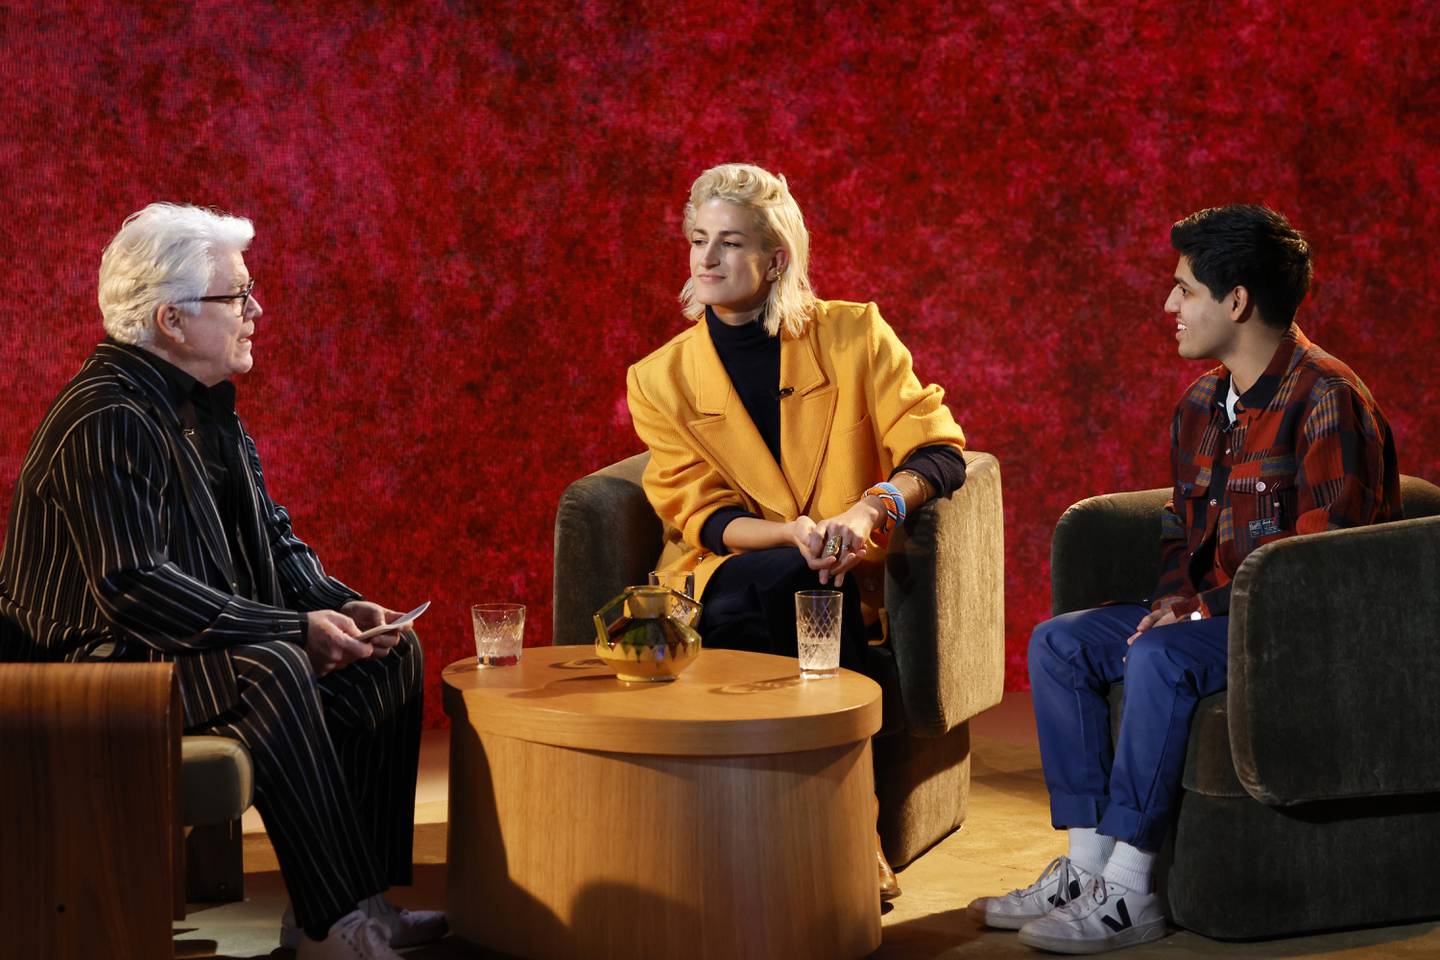 Tim Blanks speaks with Stephanie Simon and Ziad Ahmed at BoF VOICES 2022 at Soho Farmhouse.